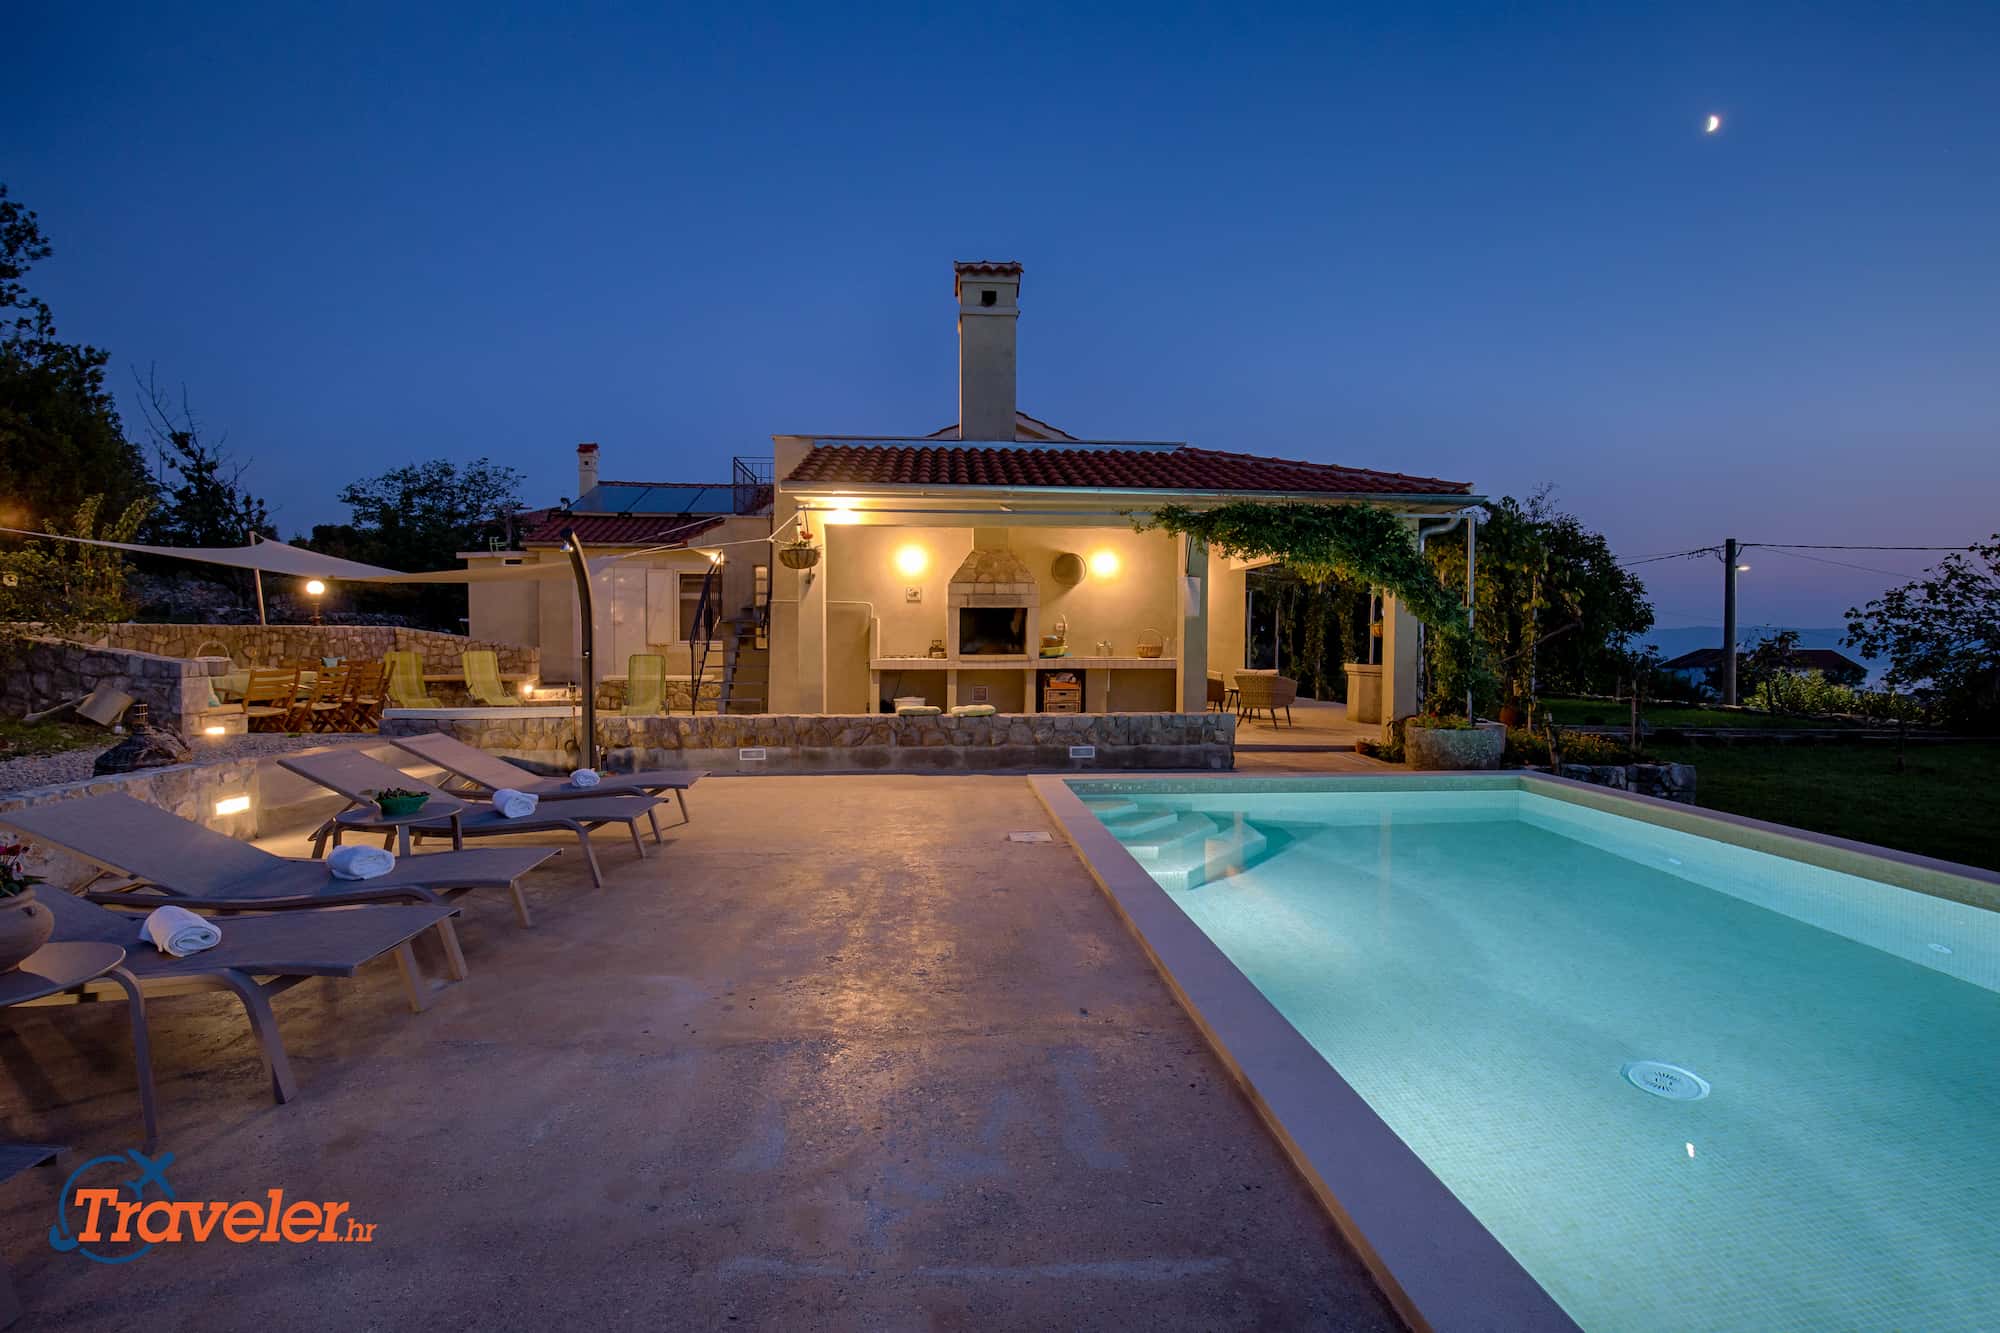 Romantic villa with pool, beautiful nature and the sea view